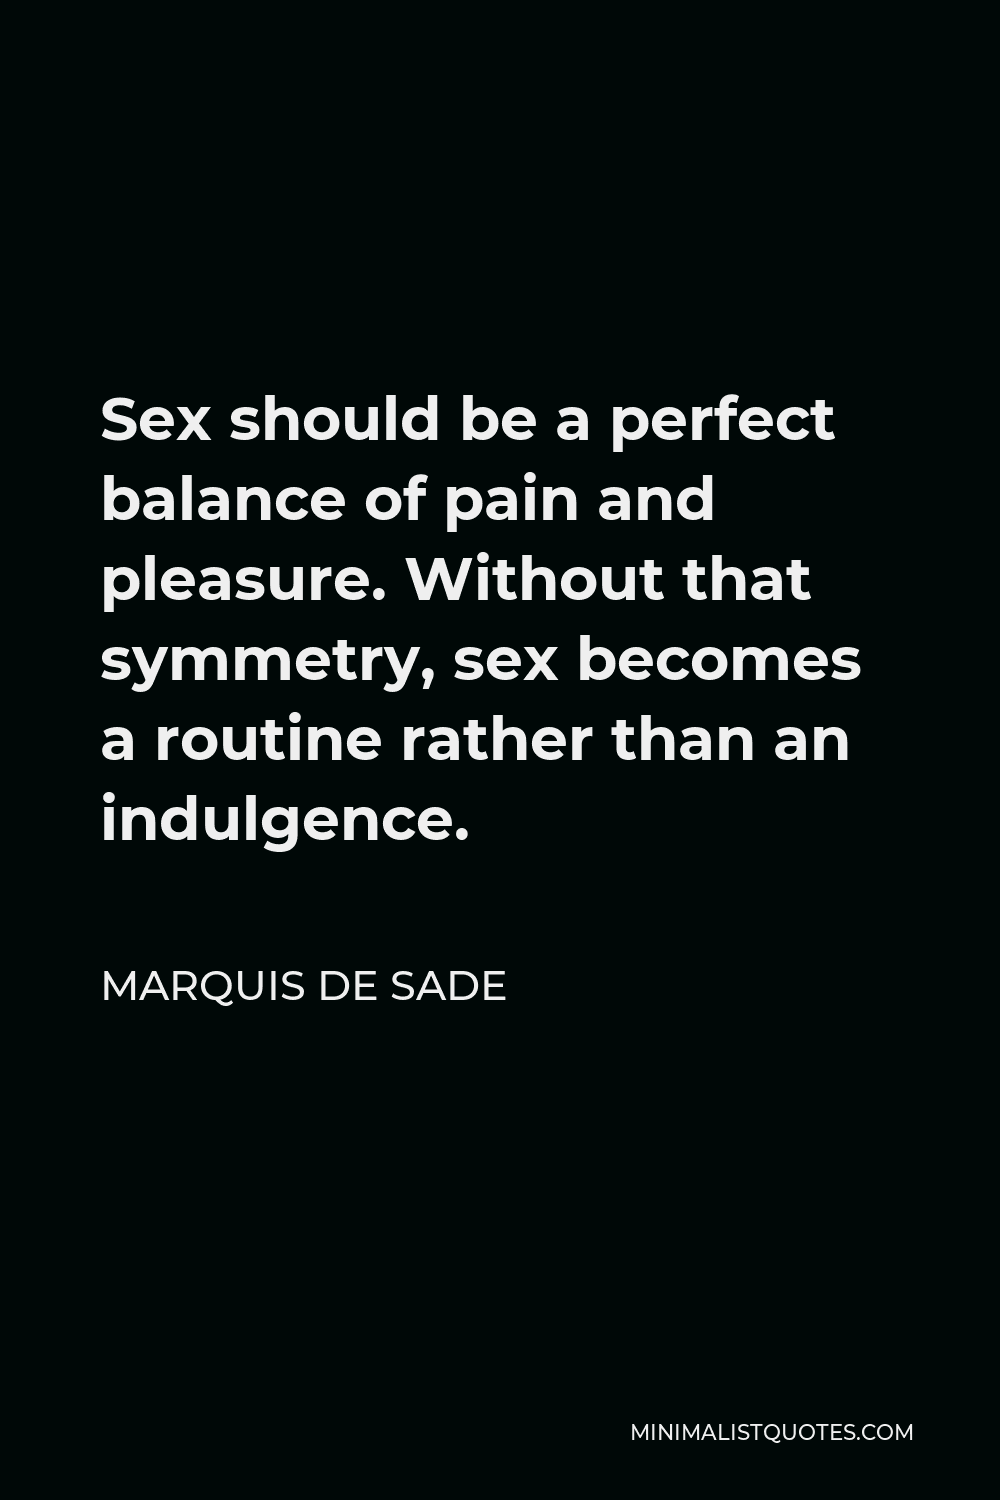 Marquis de Sade Quote - Sex should be a perfect balance of pain and pleasure. Without that symmetry, sex becomes a routine rather than an indulgence.